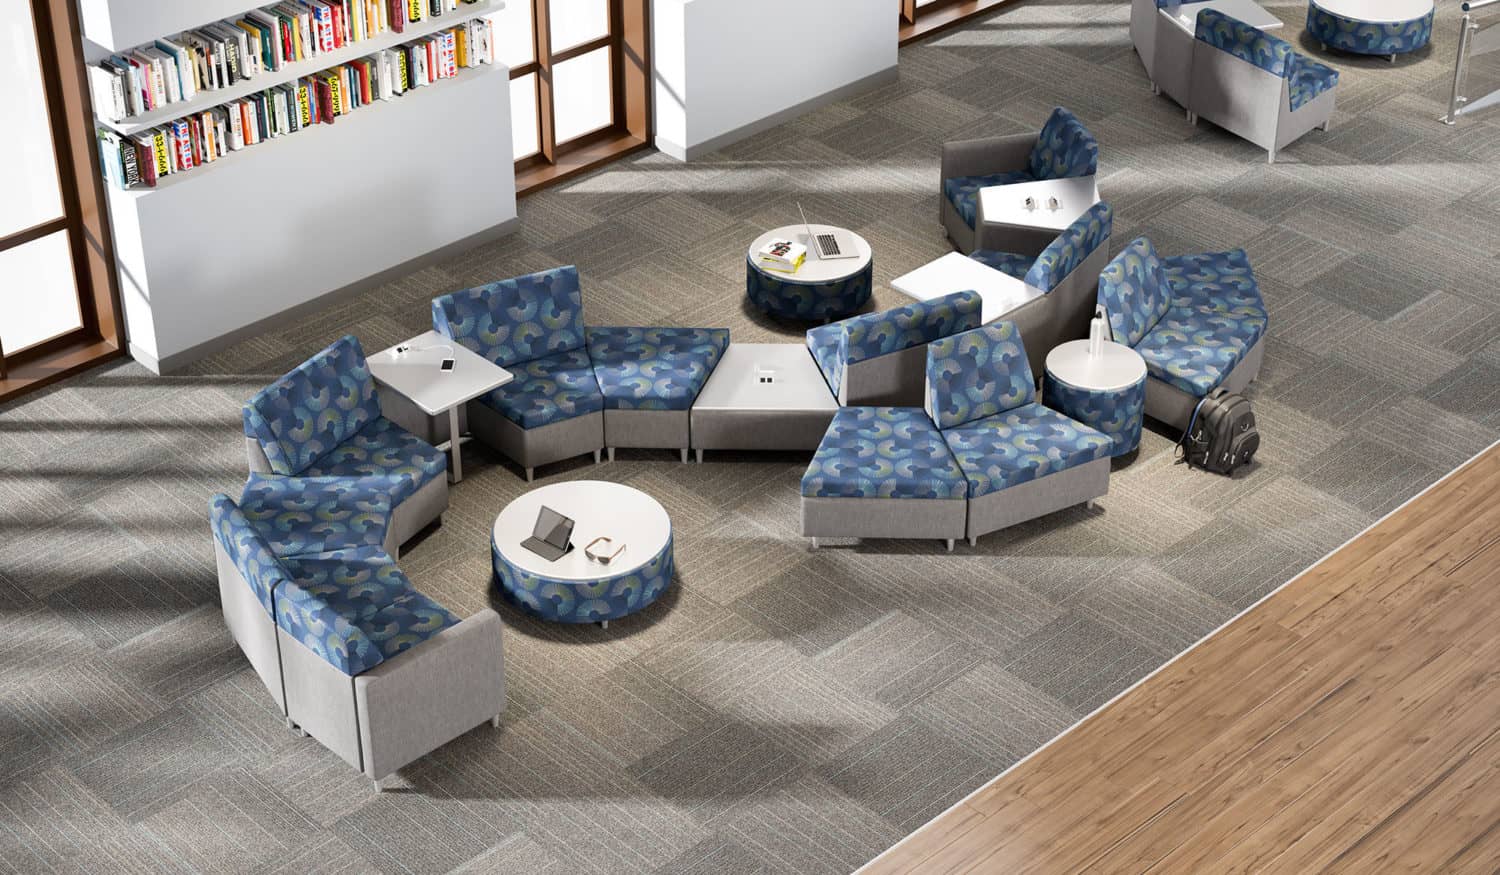 Rally Wedges in library setting, with power and ottomans